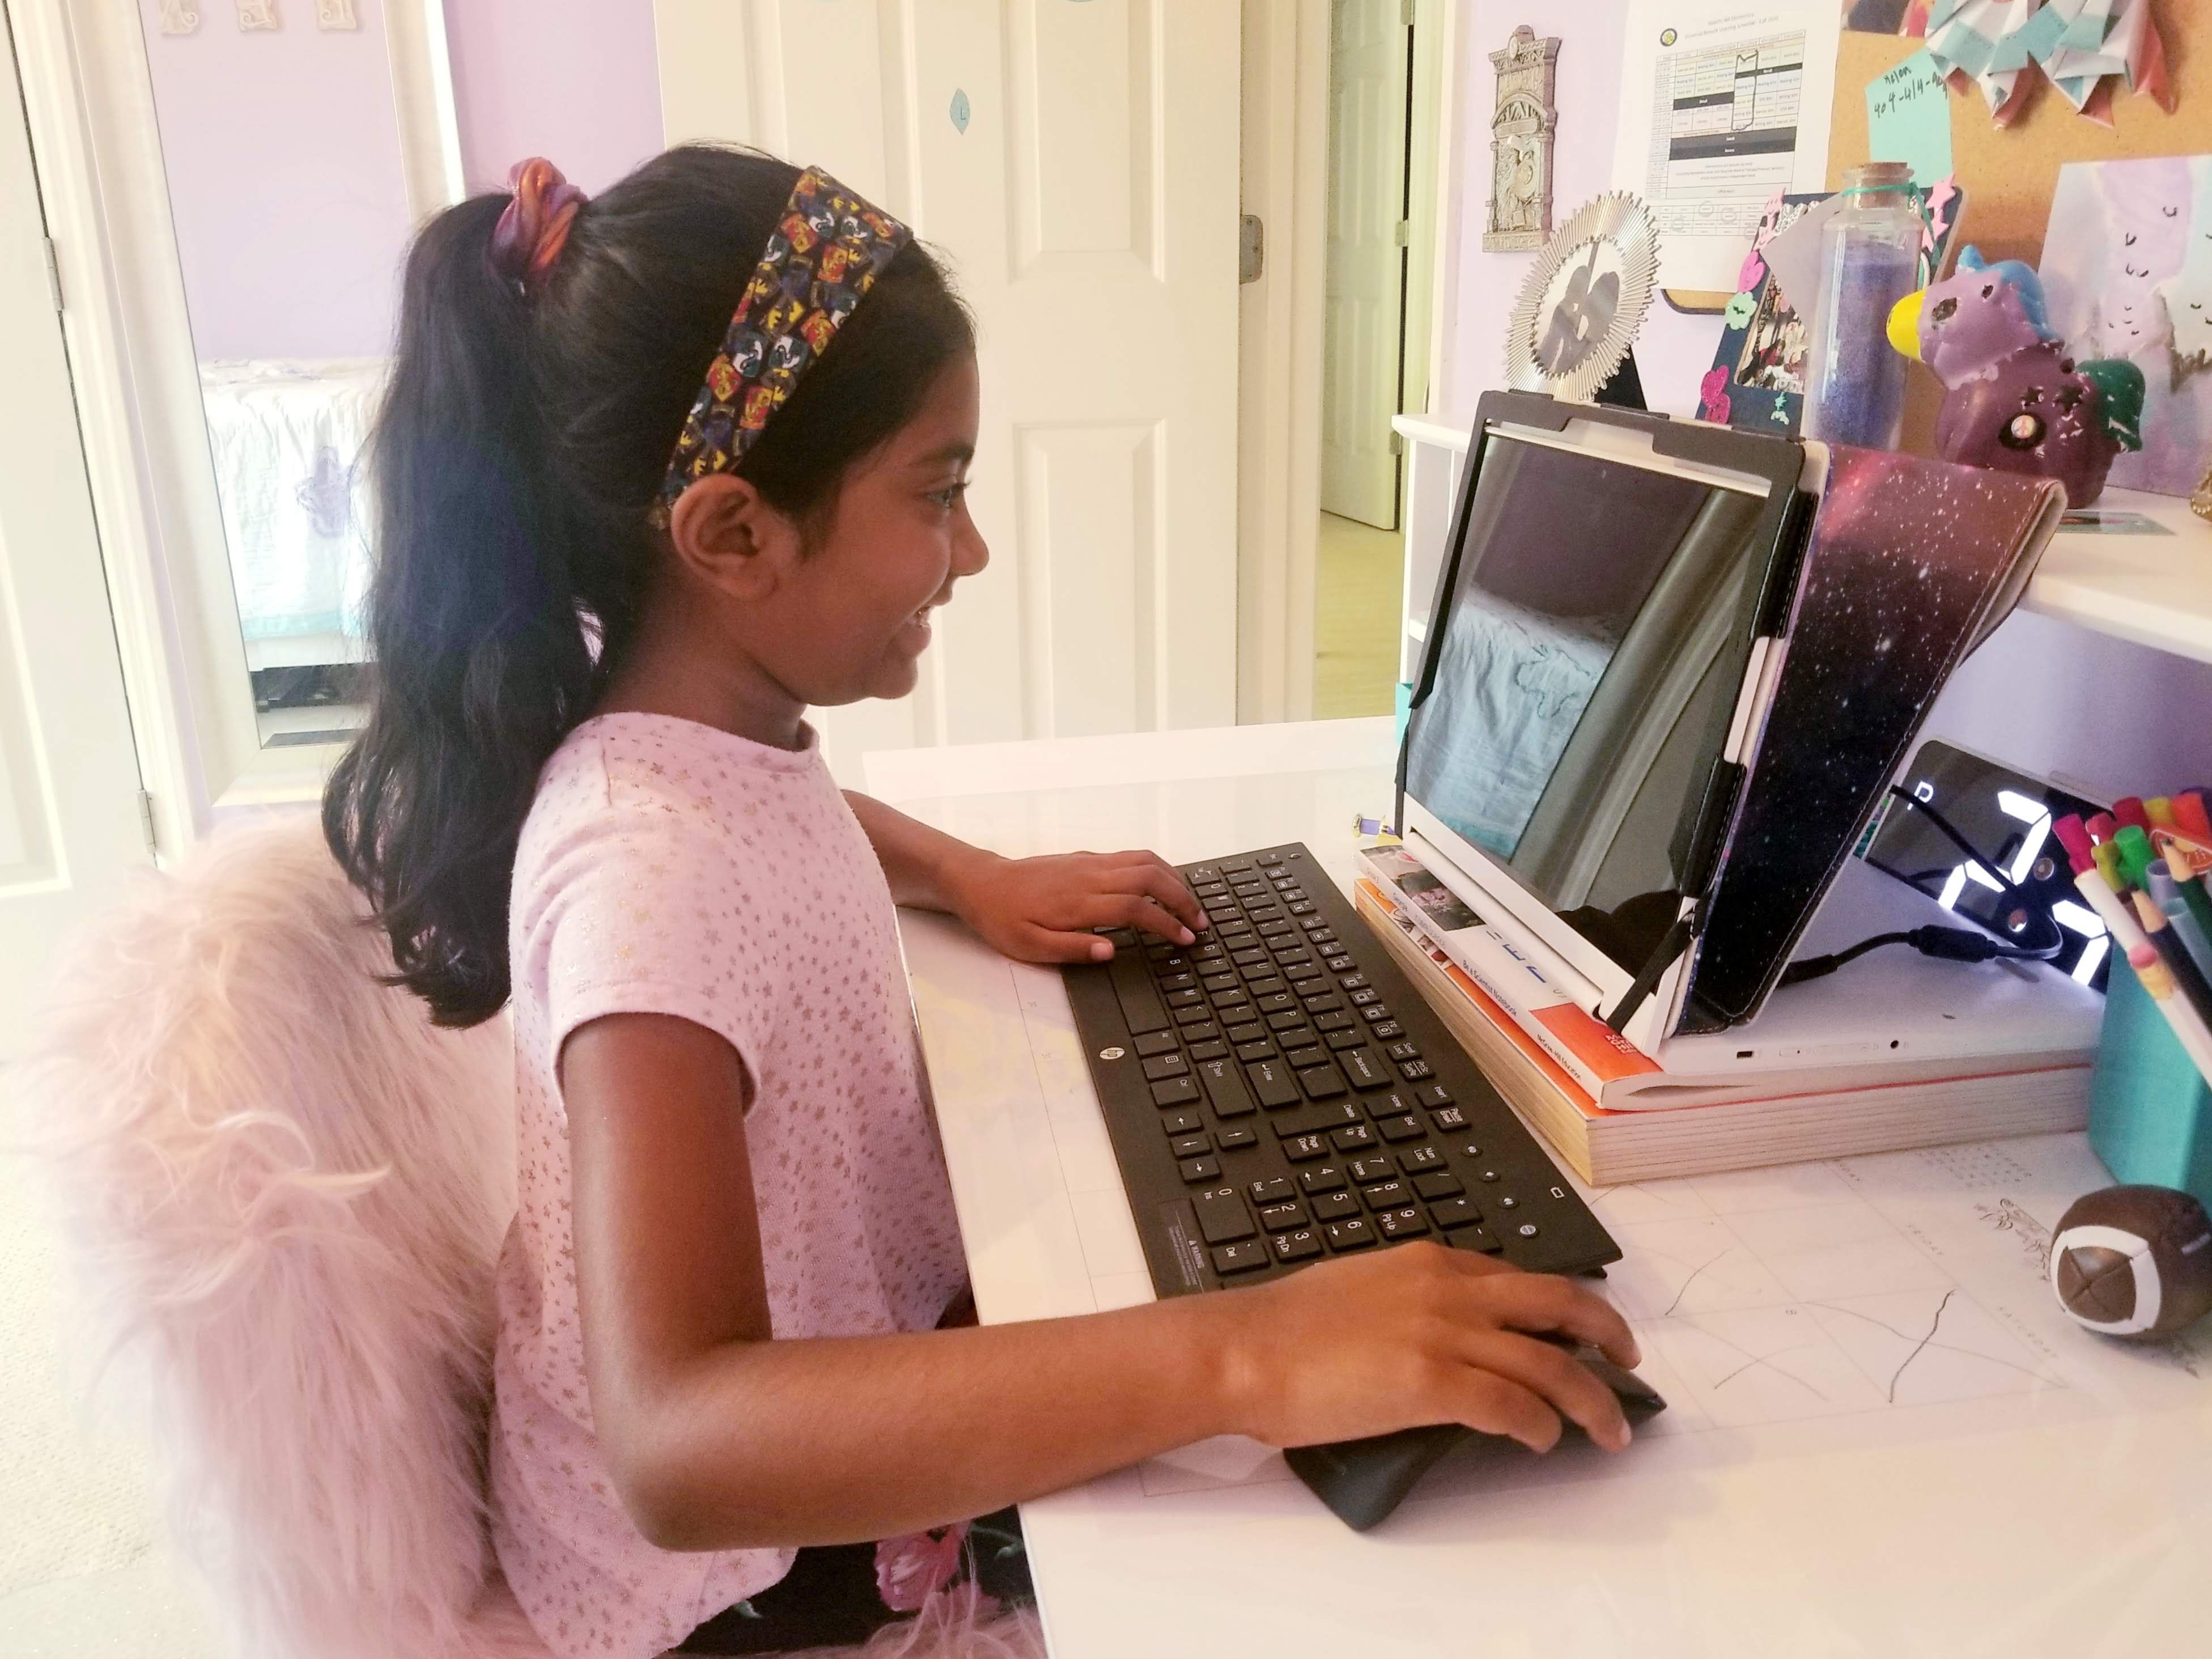 A young female student attends virtual class on her laptop.